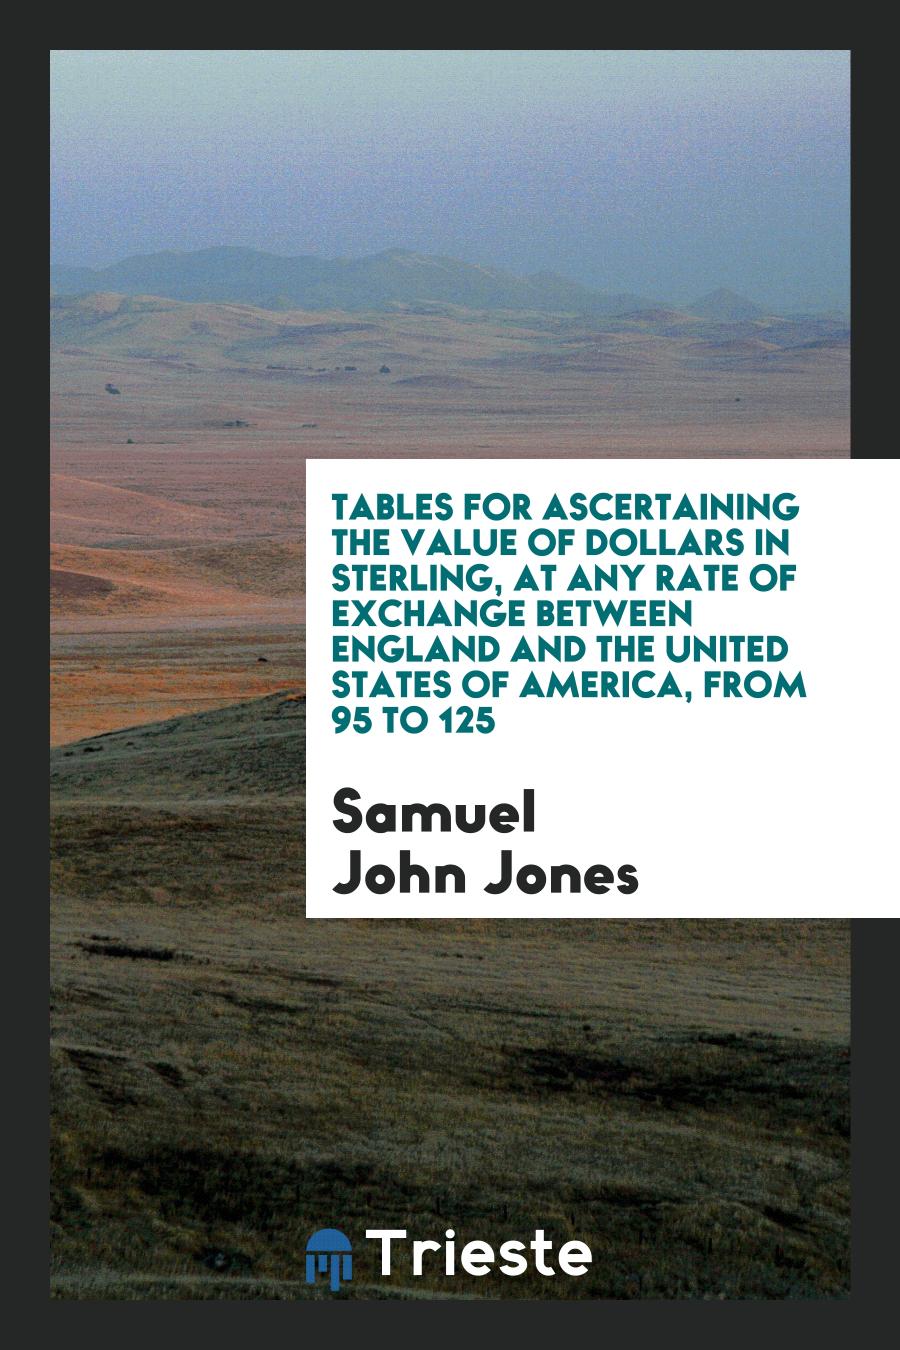 Tables for ascertaining the value of dollars in sterling, at any rate of exchange between England and the United States of America, from 95 to 125